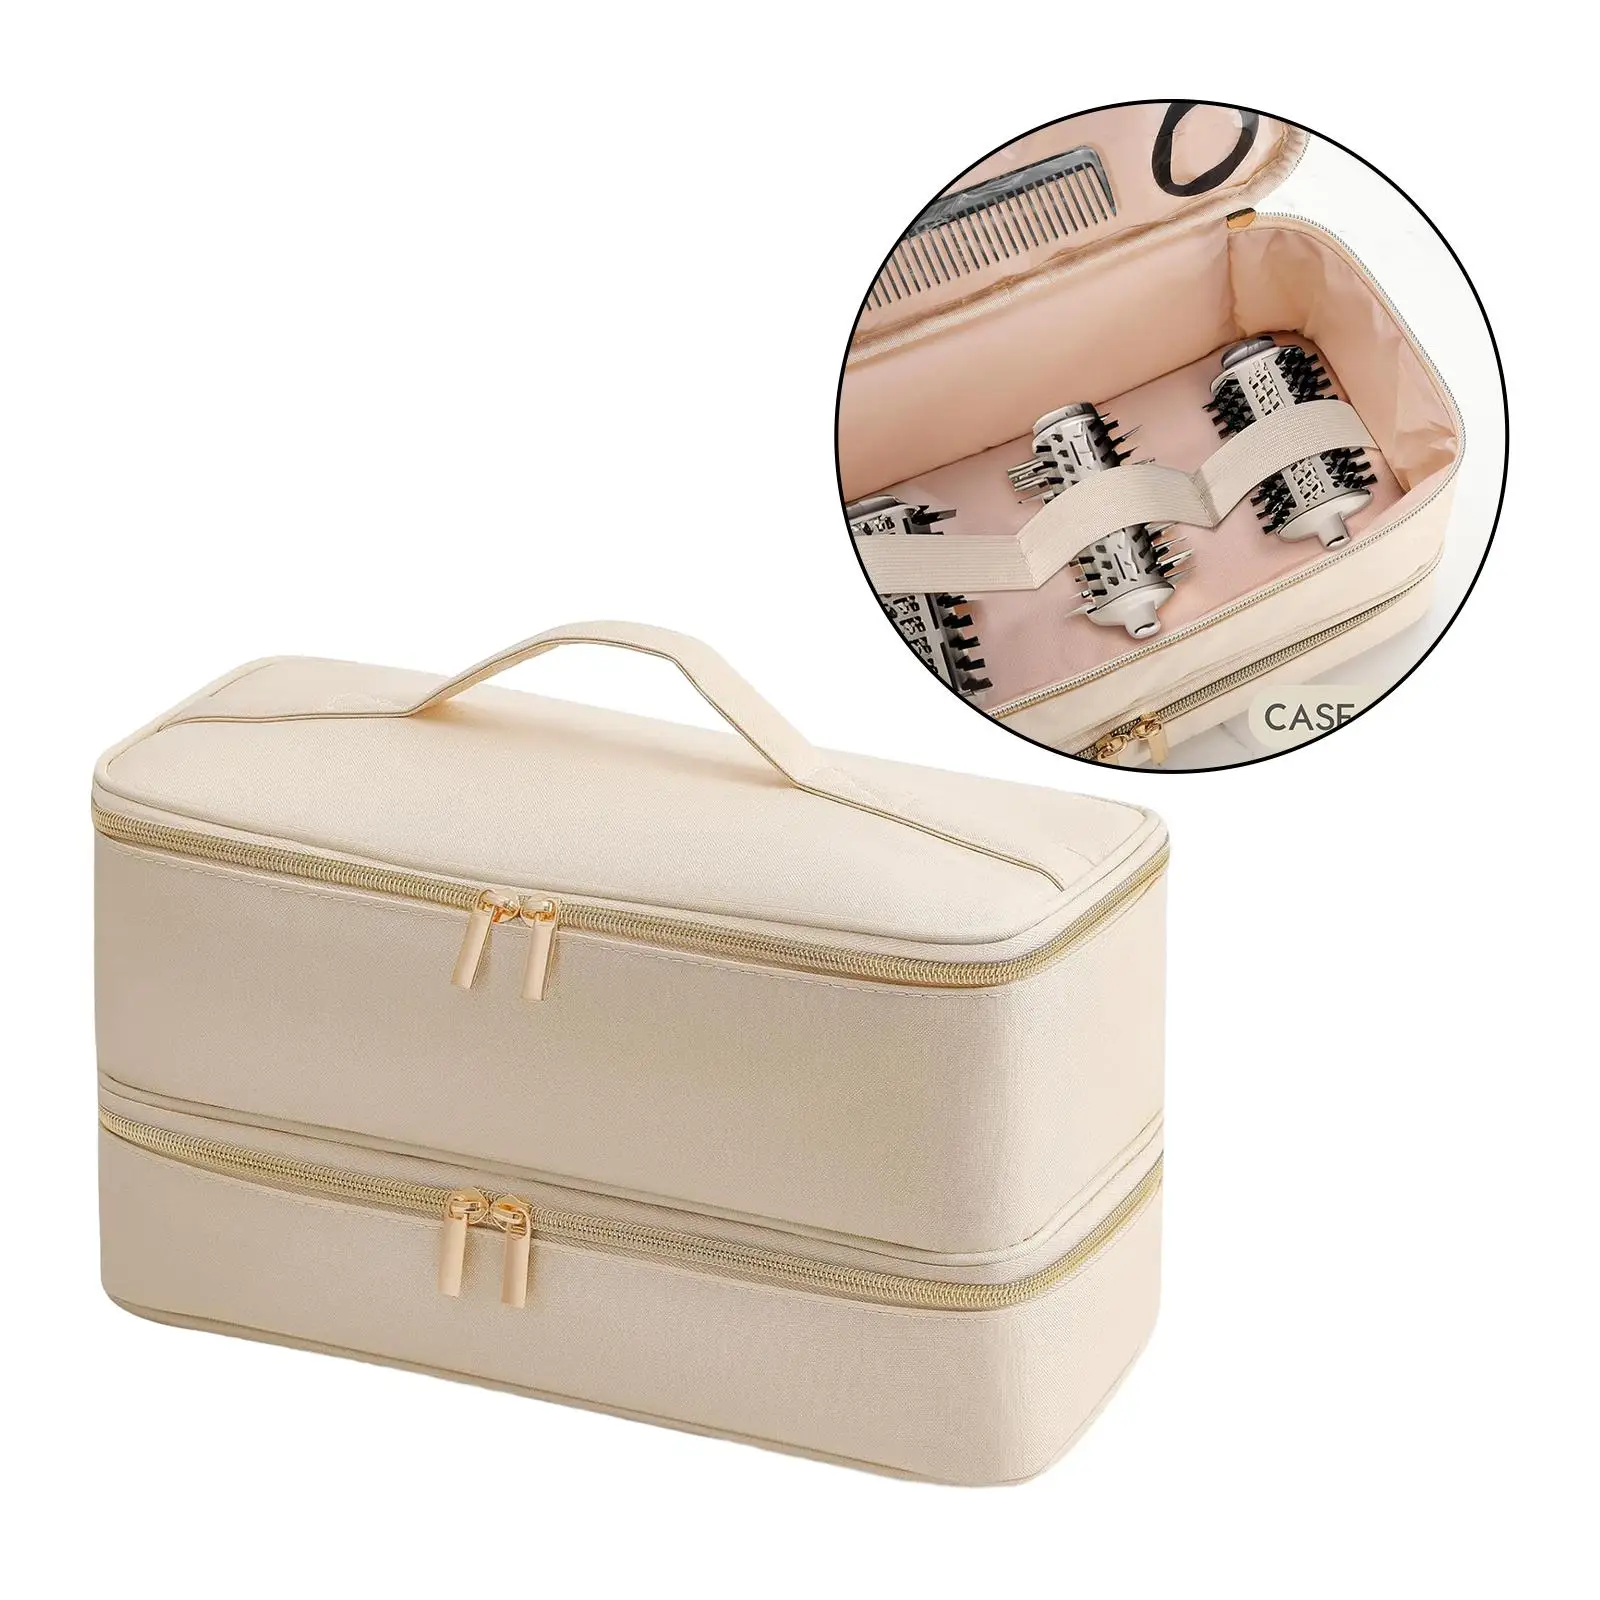 Double Layer Travel Carrying Case Hair Curler Tool Double Layer Travel Case for Hair Dryer Brush Travel Hair Curler Accessories